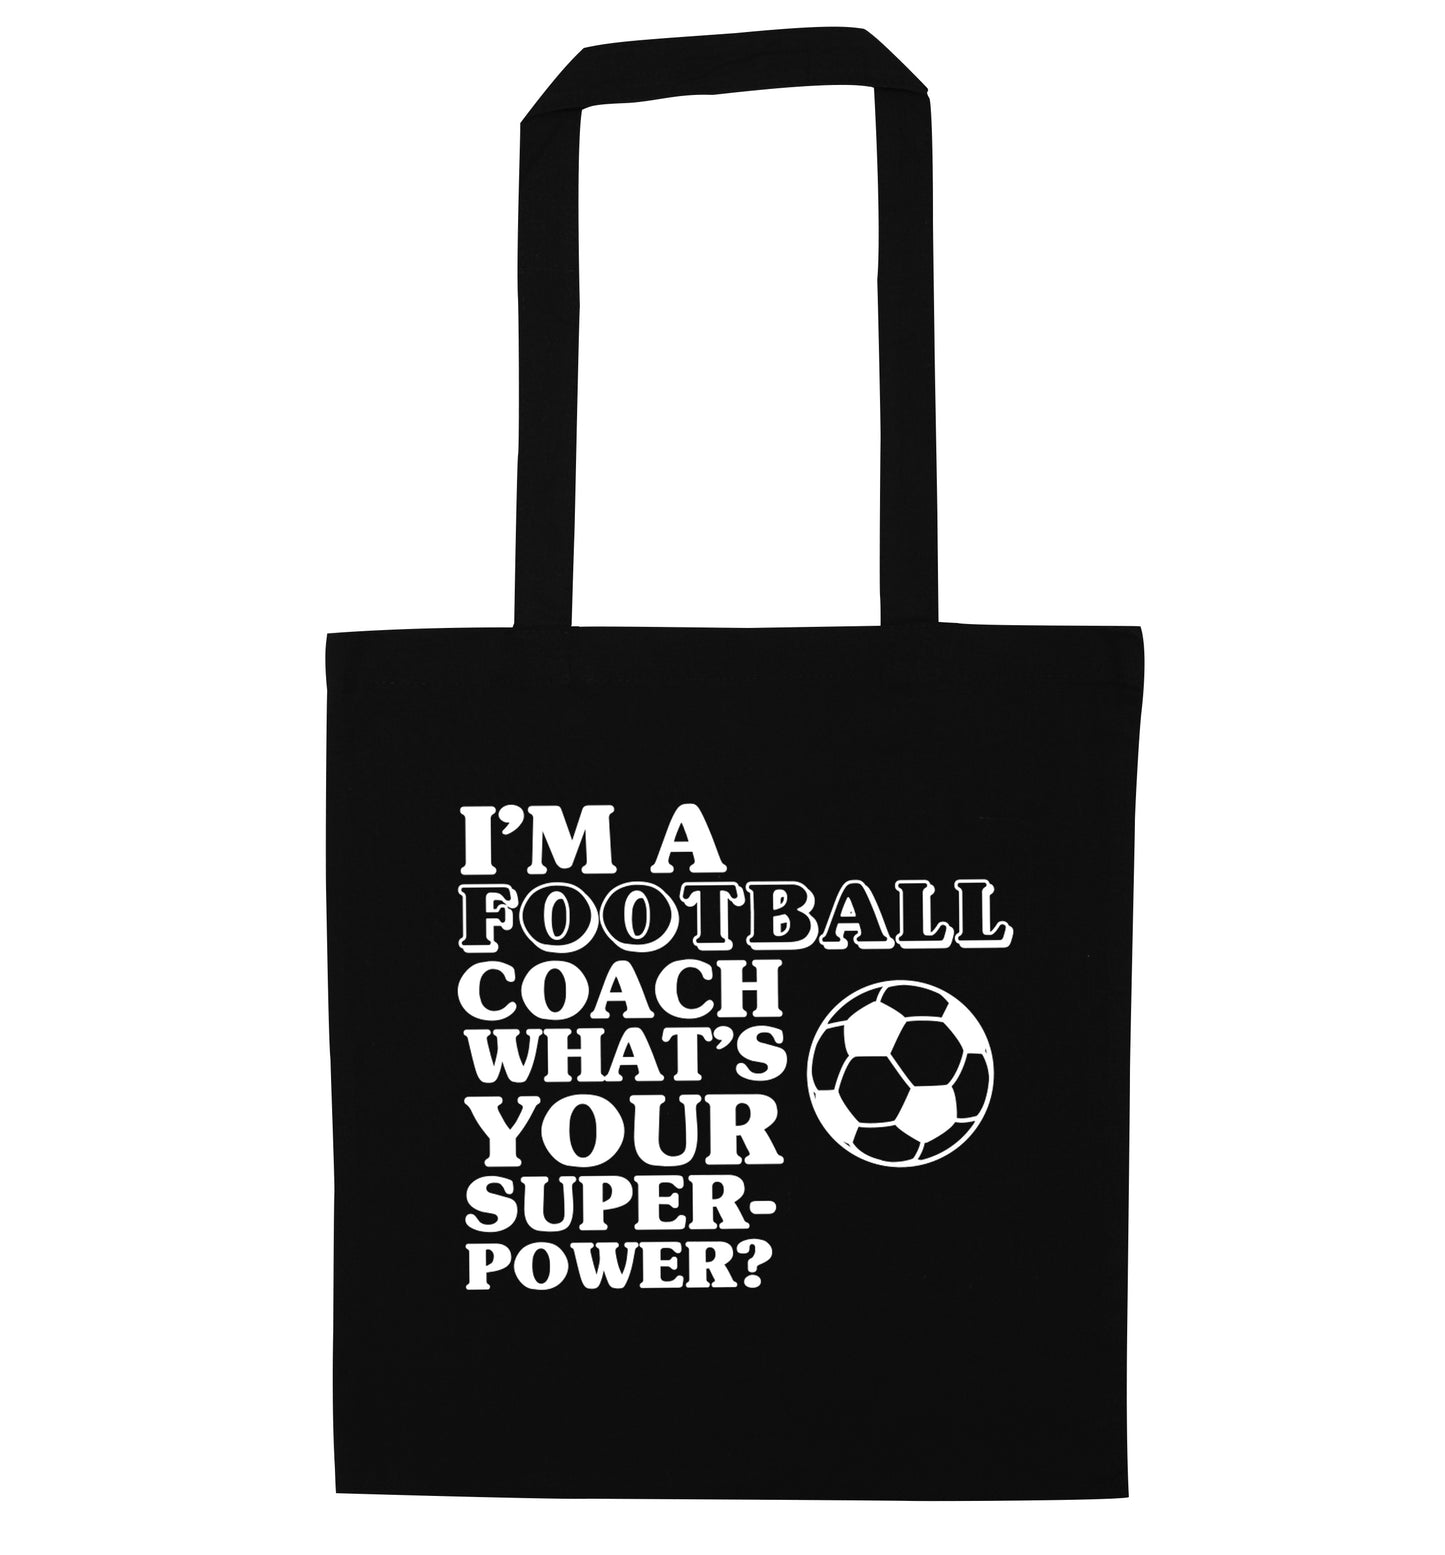 I'm a football coach what's your superpower? black tote bag